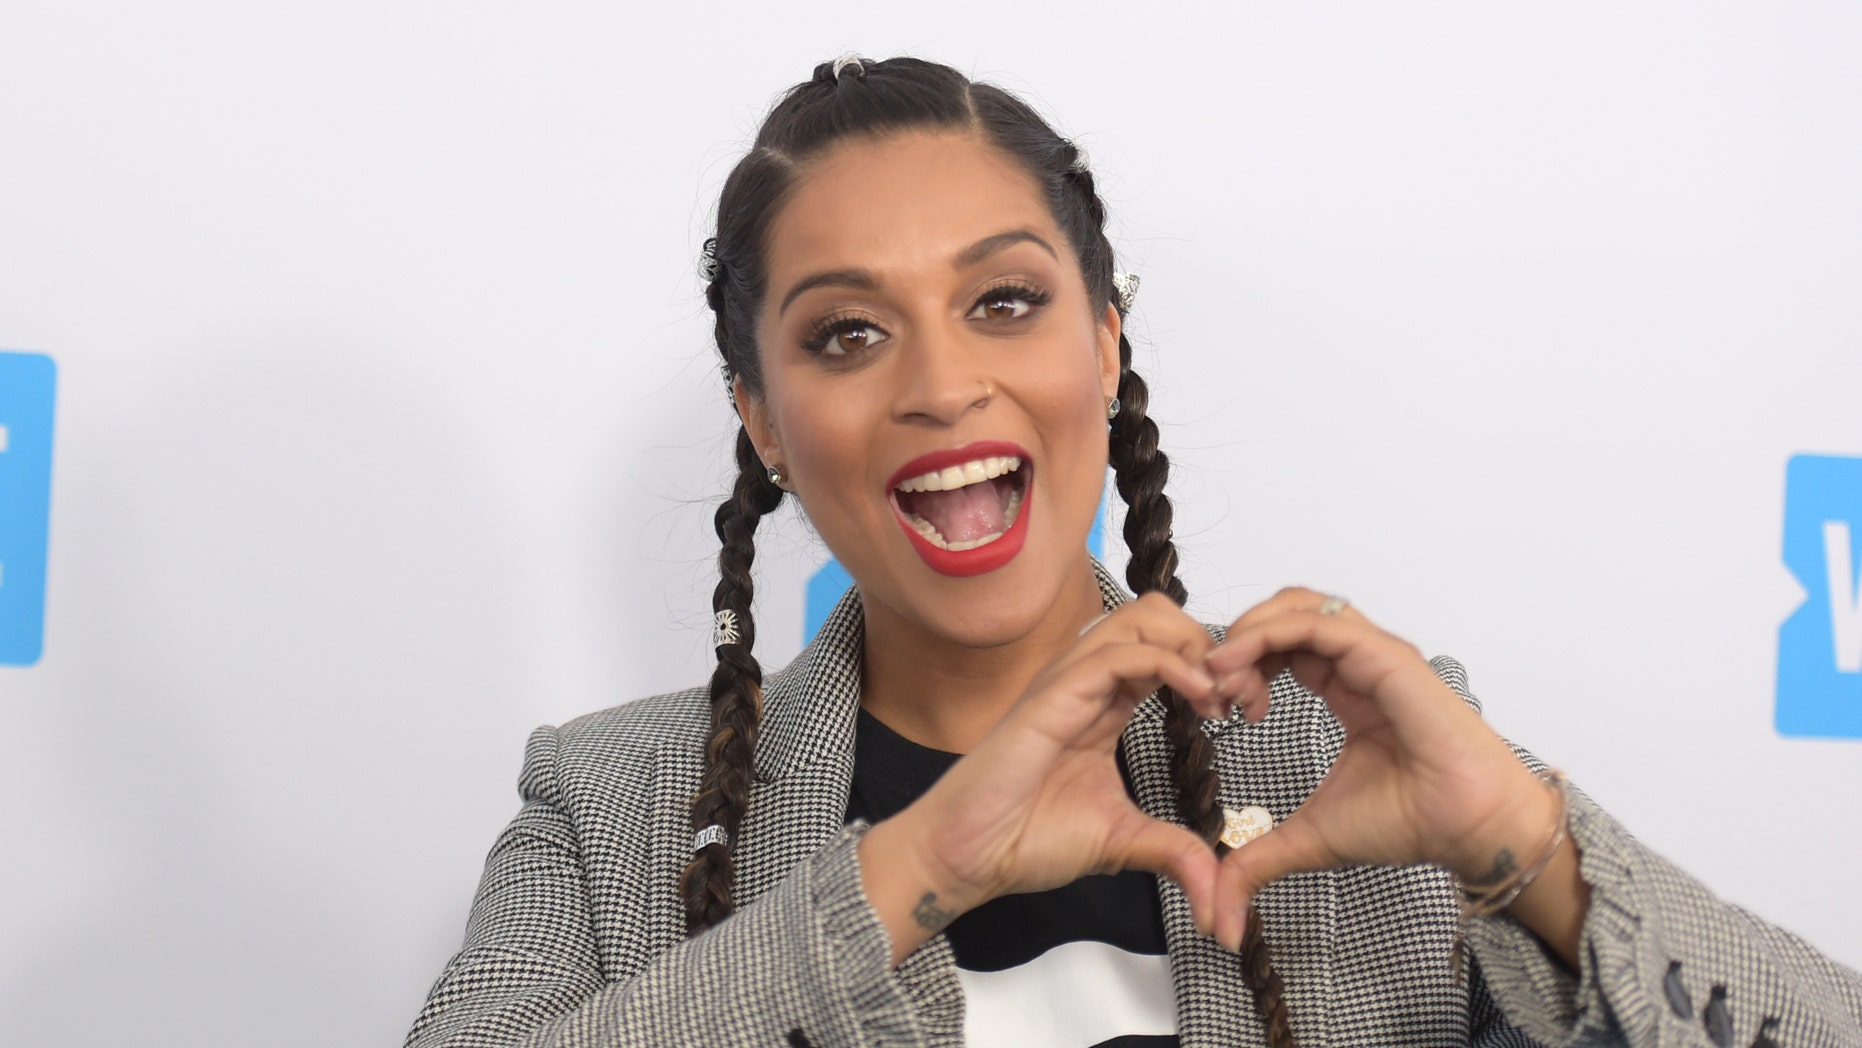 Lilly Singh will be on screen for a new show called "A Little Late with Lilly Singh", which will air at 1:35 pm EDT starting in September on NBC.